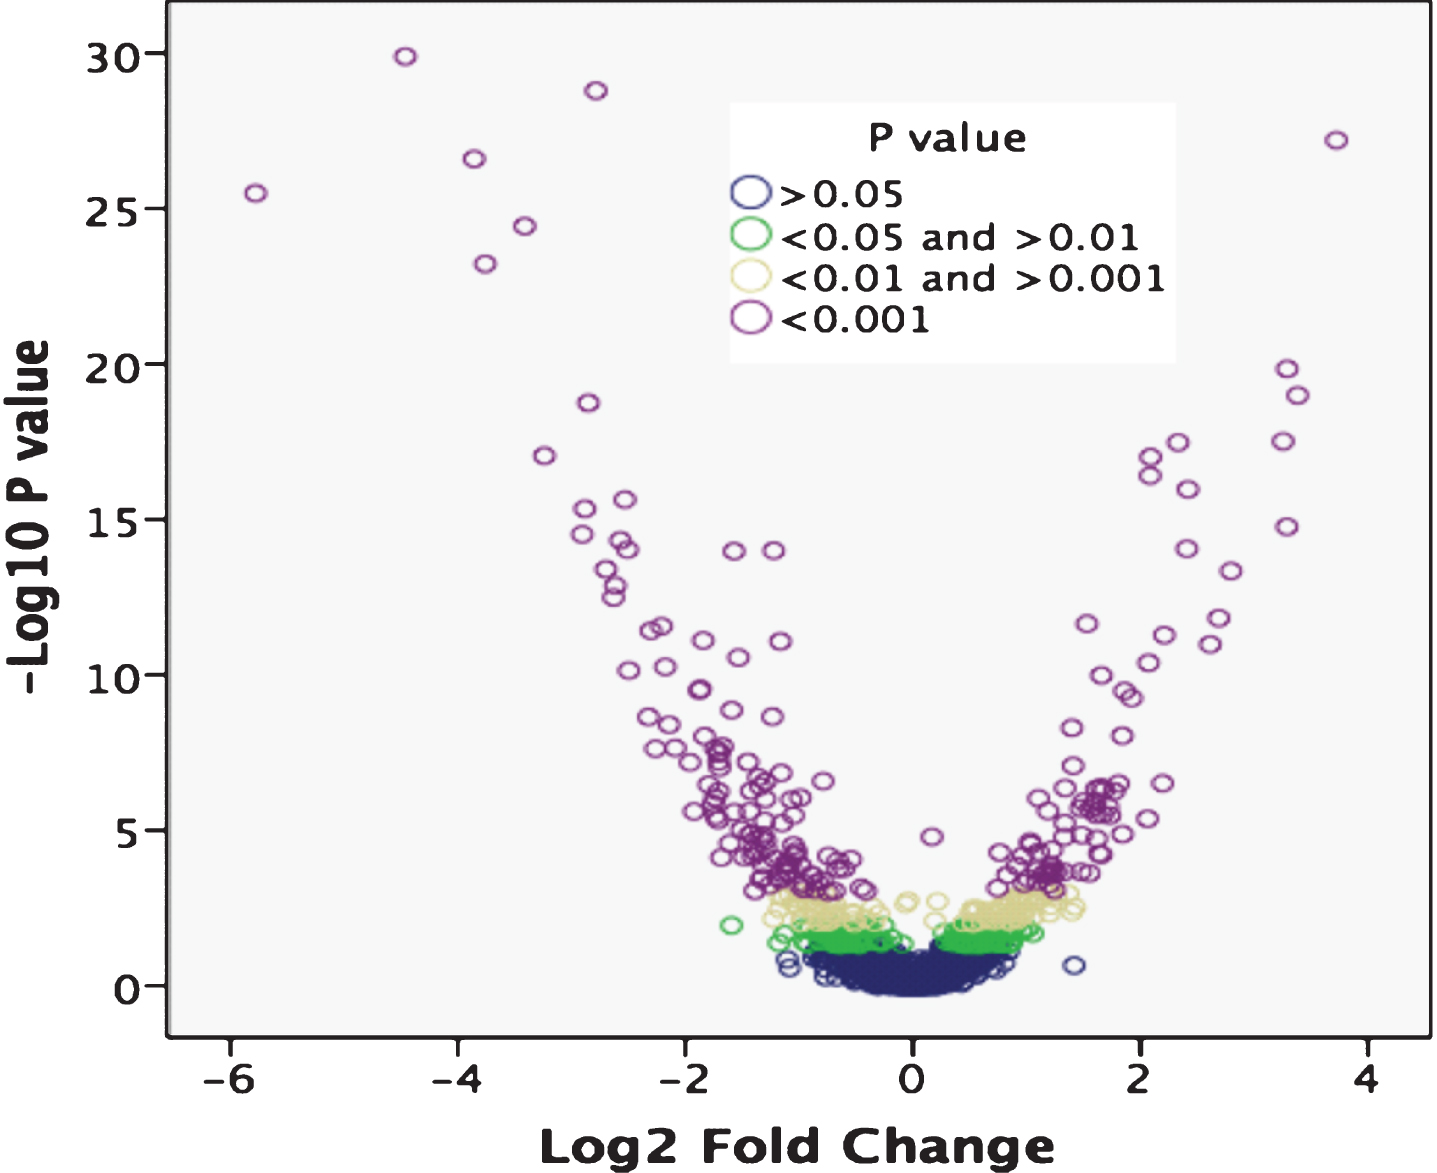 Volcano plot of differentially expressed genes (DEGs) between PD patients and controls. Log2 fold change was plotted against the Edge R-generated p-value (-log base 10). Differential expression analysis using a p <  0.05 cutoff identified 467 DEGs between PD patients and controls. The gene list was cut to 207, 103 and 157 DEGs using cutoffs of p <  0.001, 0.01 <  p <  0.001 and 0.01 <  p <  0.05, respectively.